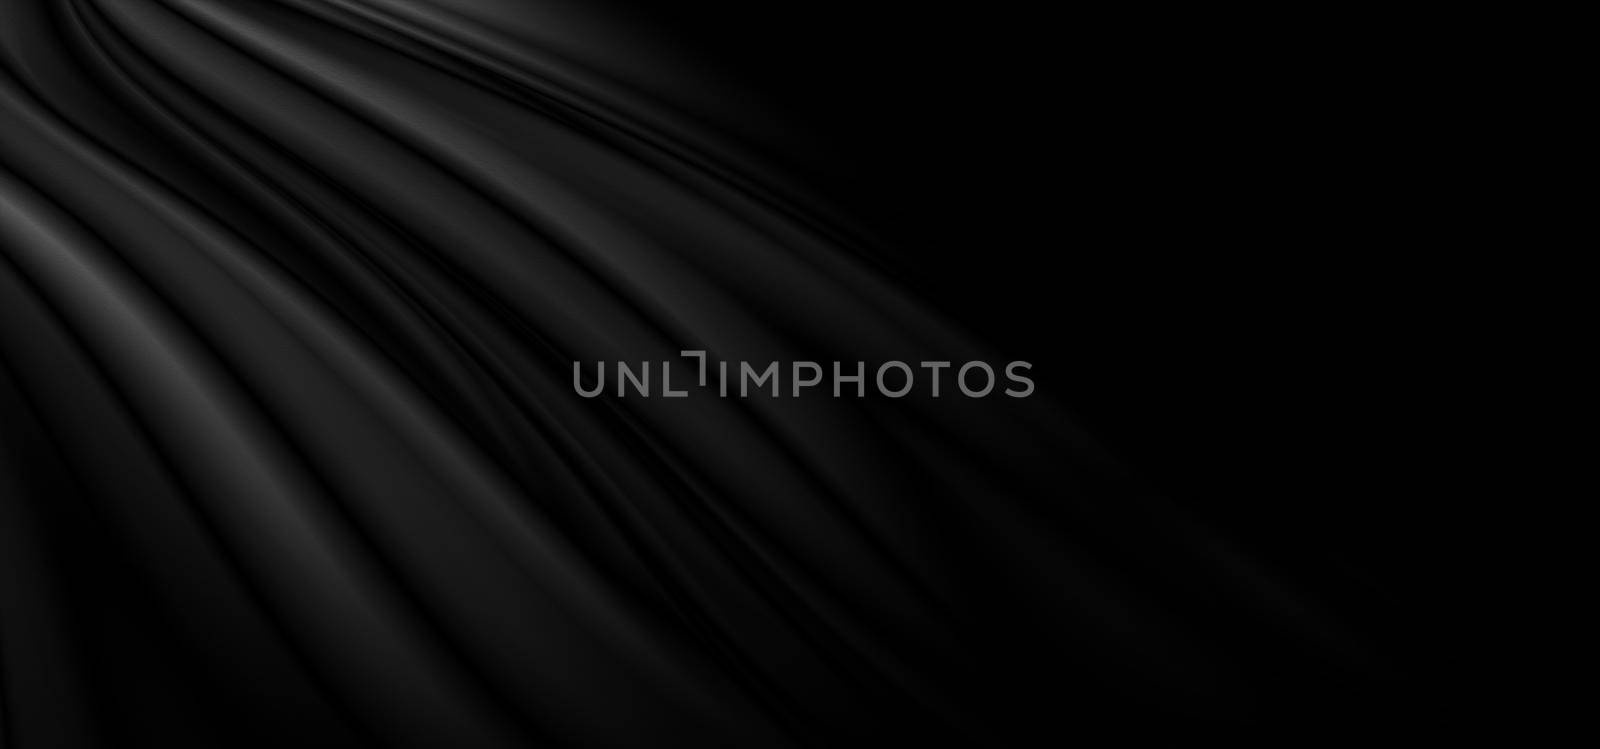 Black fabric background 3D illustration by Myimagine